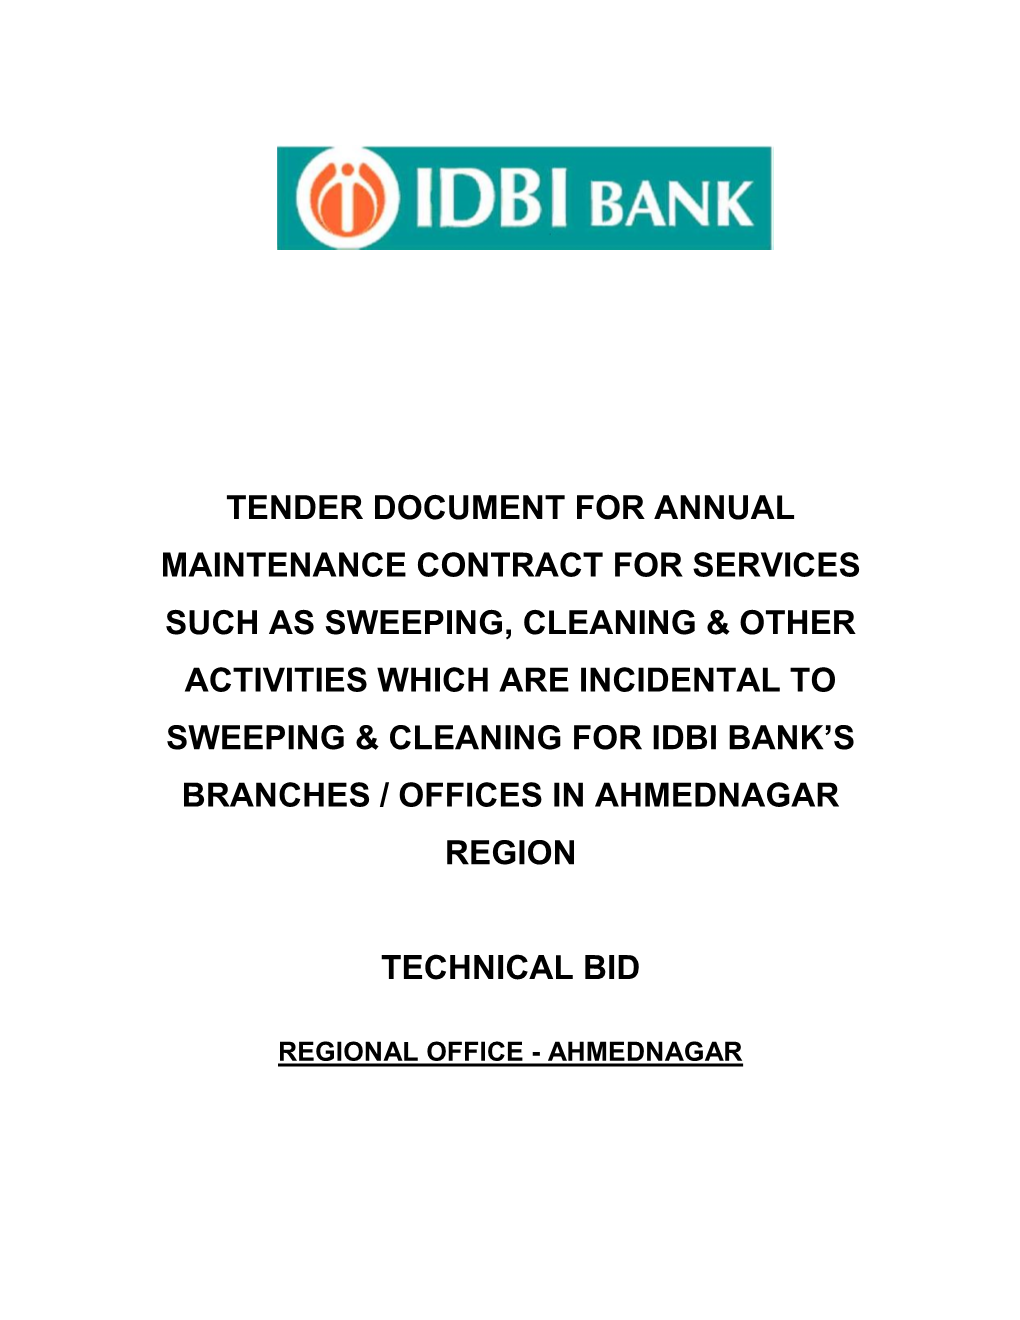 Tender Document for Annual Maintenance Contract For